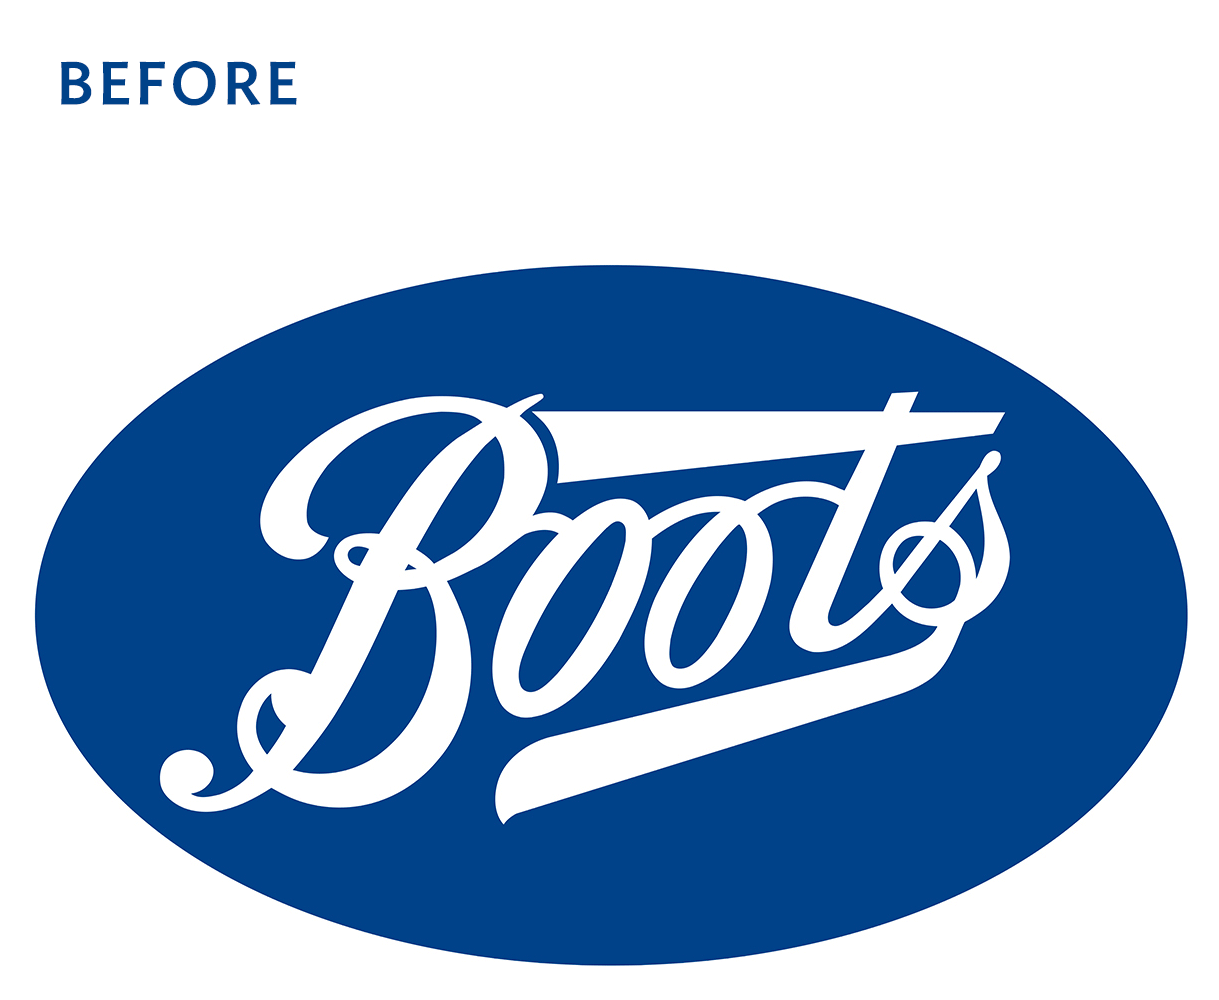 New Logo and Identity for Boots UK by Coley Porter Bell